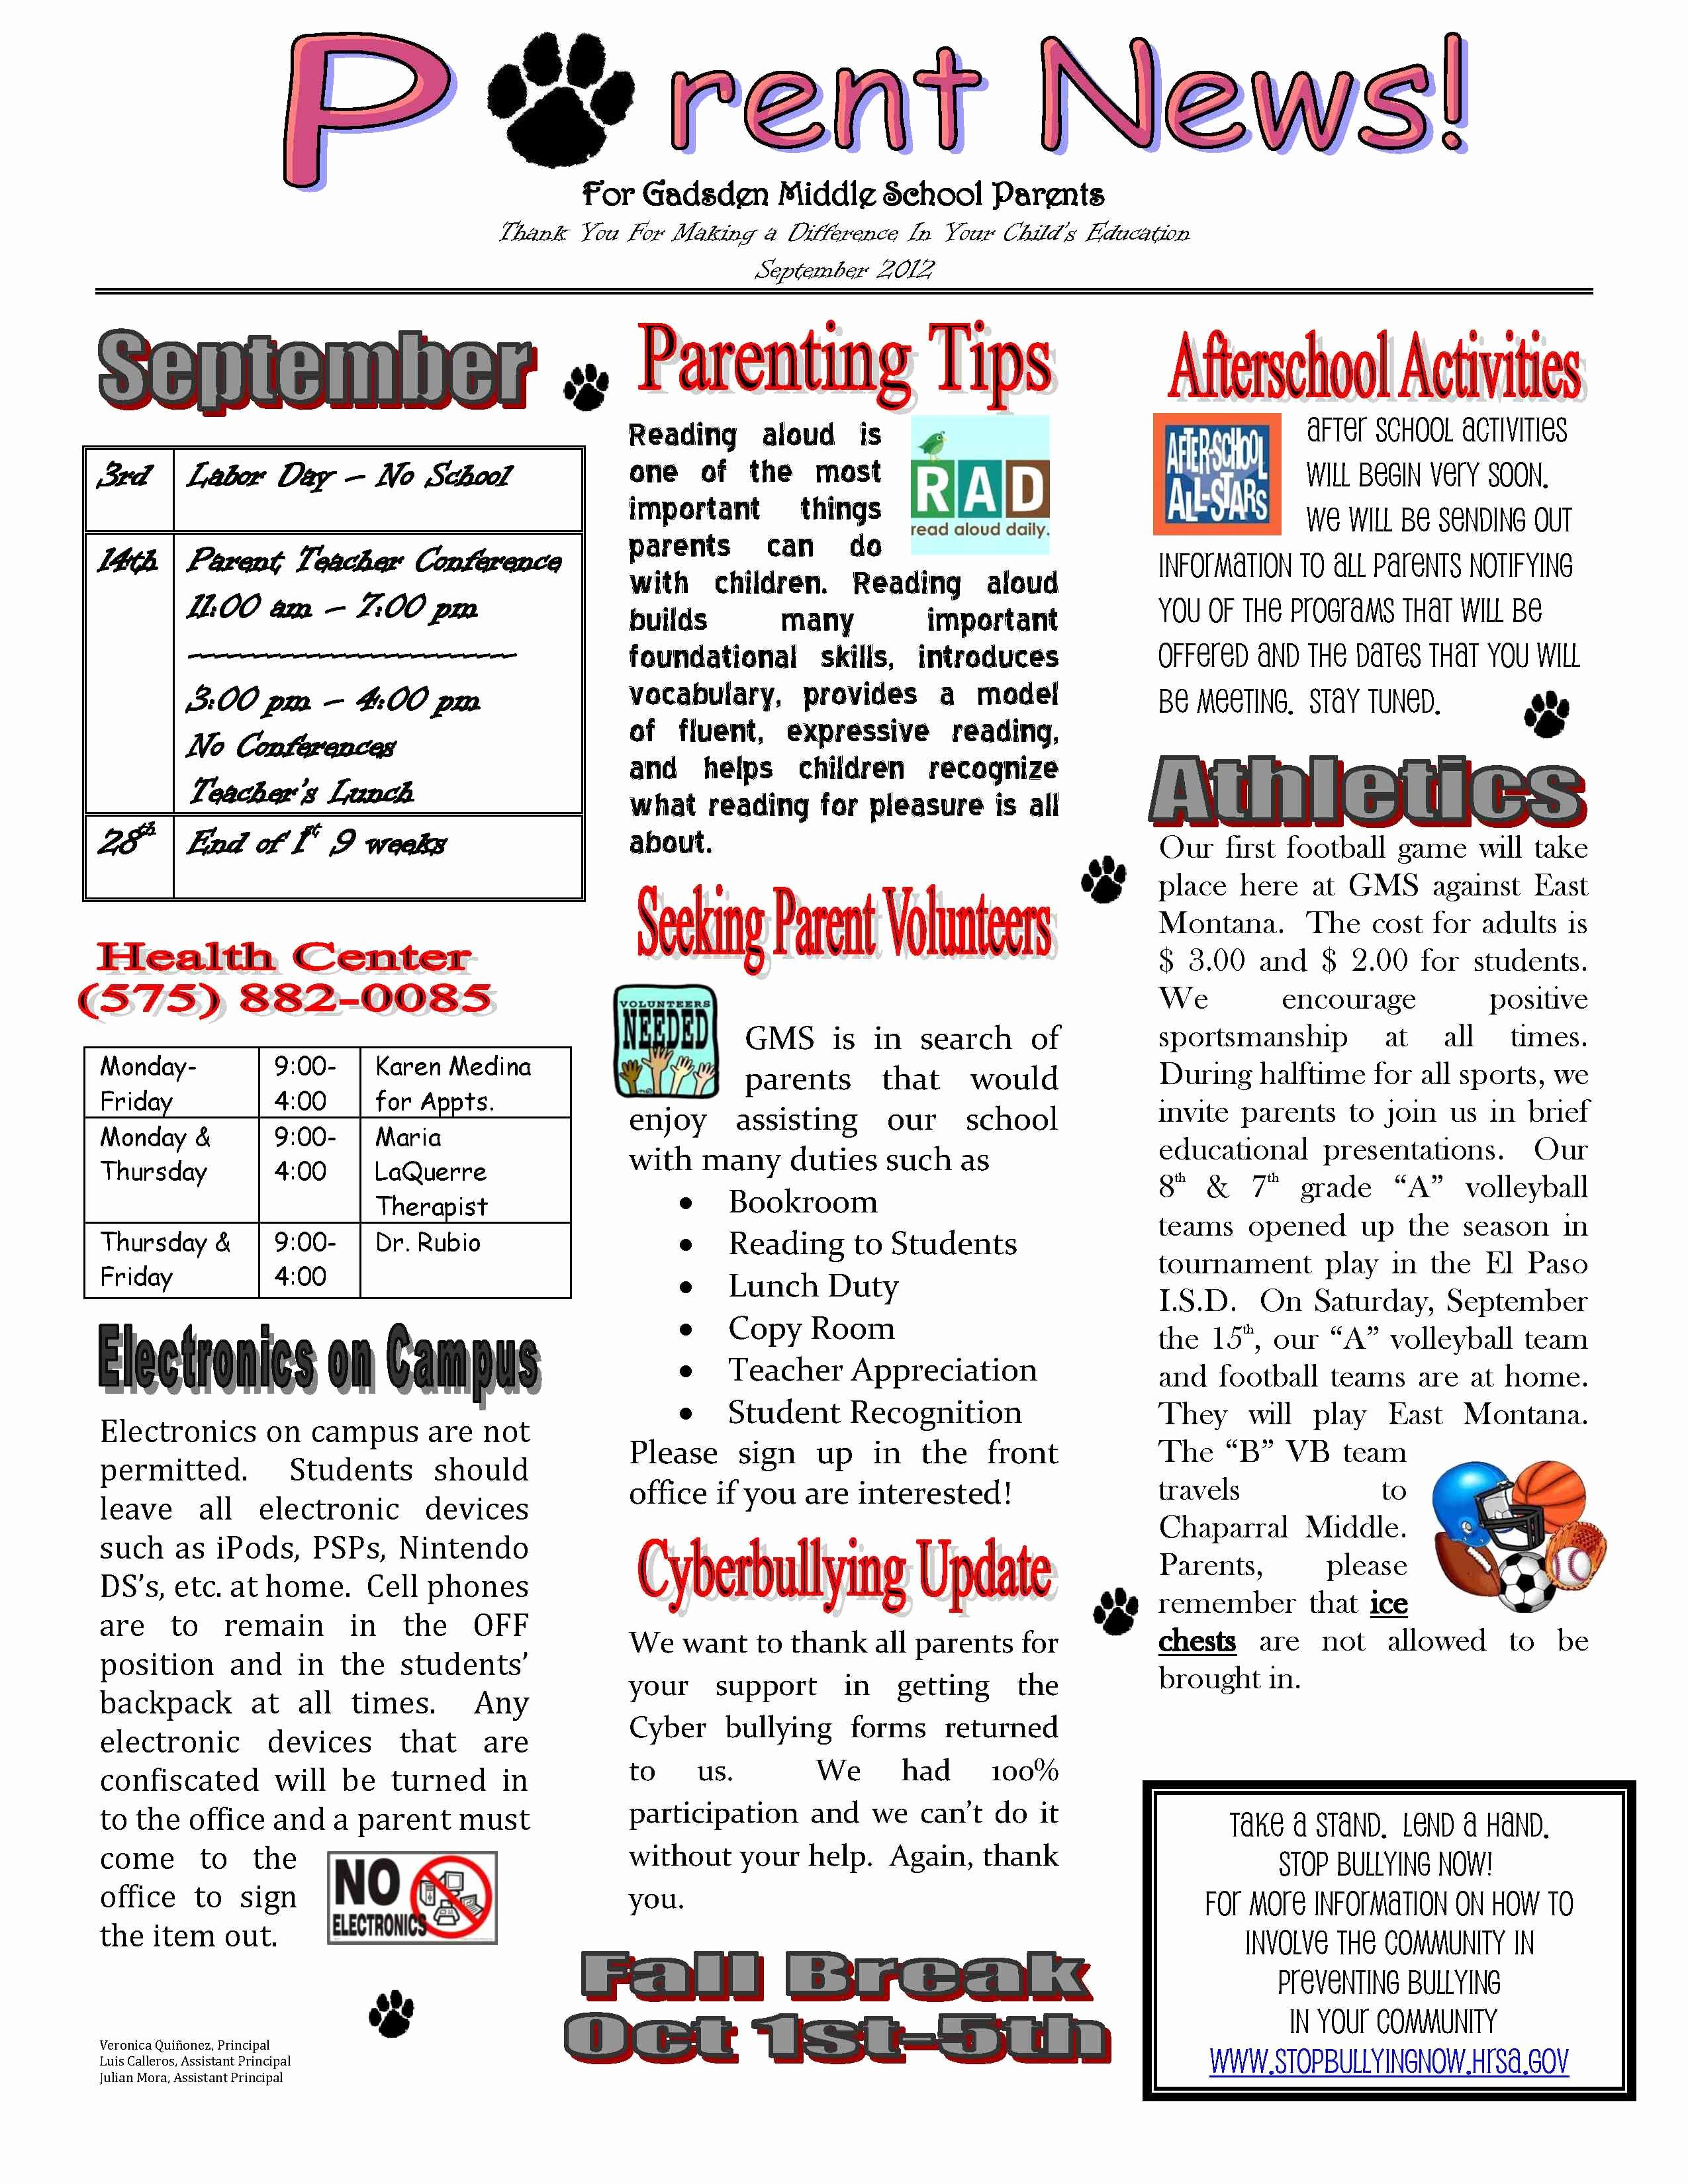 Newsletter Sample for School Lovely Example Of School Newsletter Yahoo Image Search Results Newsletter